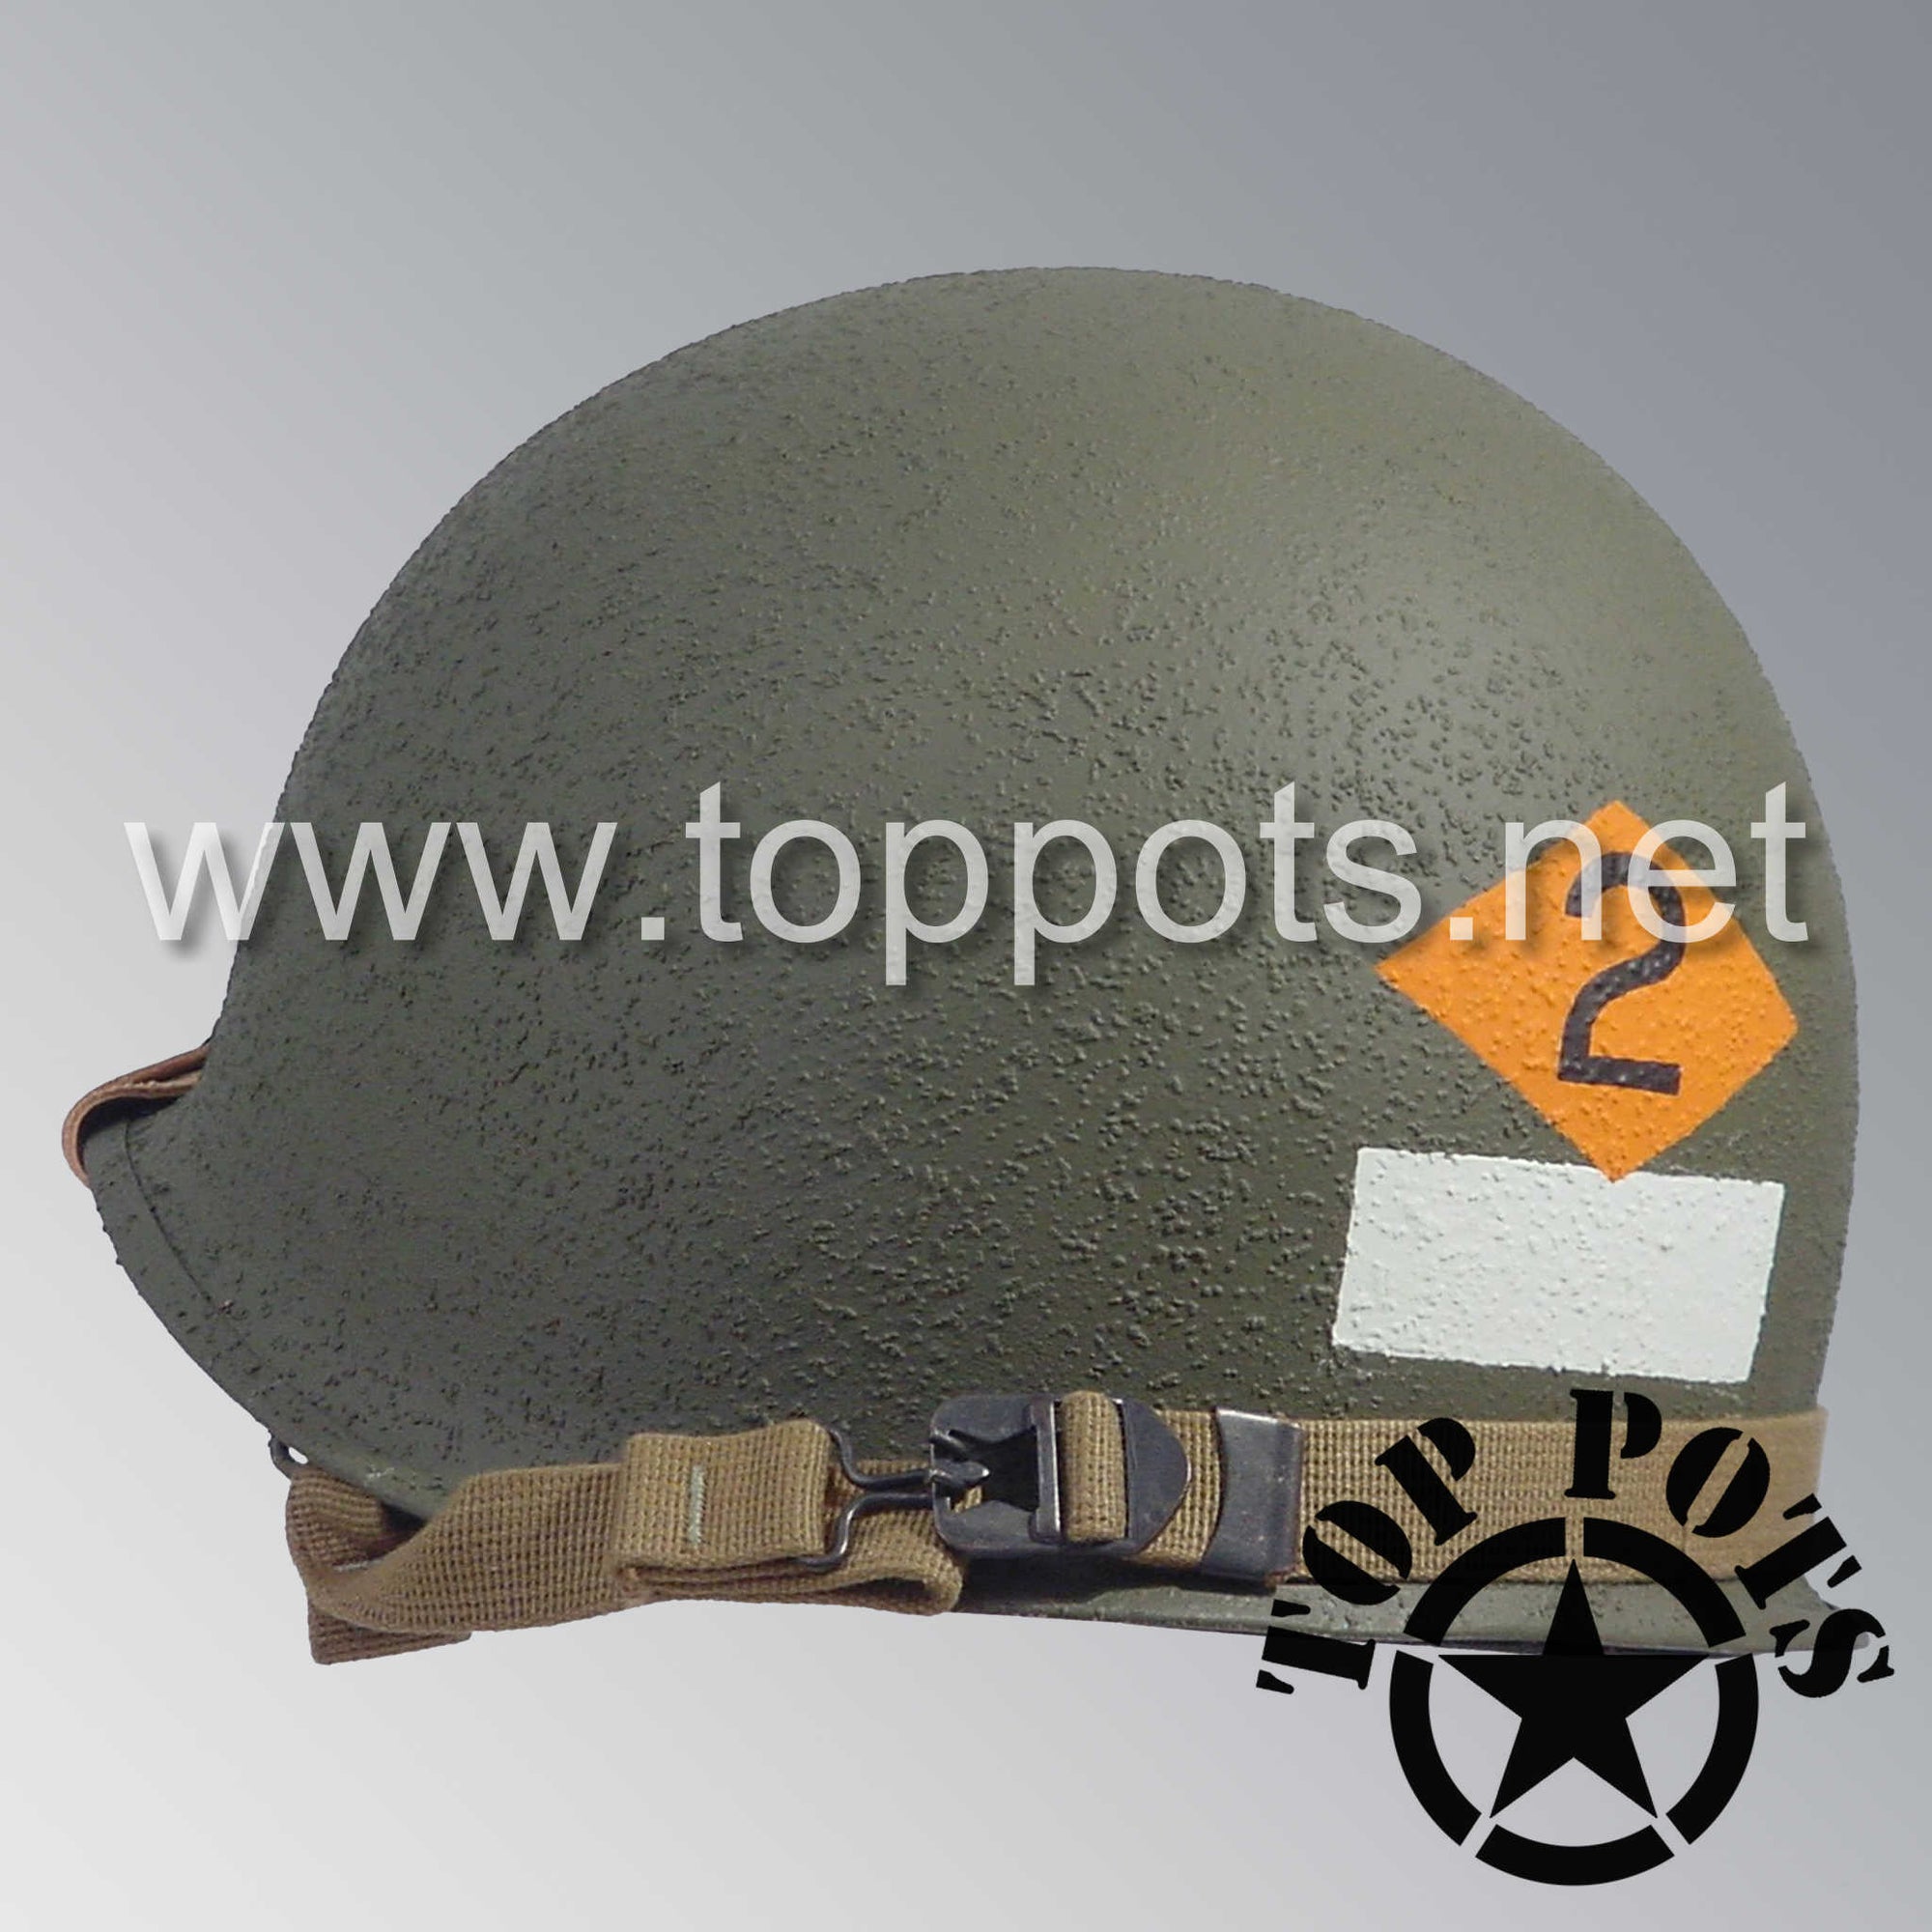 WWII US Army Restored Original M1 Infantry Helmet Swivel Bale Shell and Liner with 2nd Ranger NCO Emblem